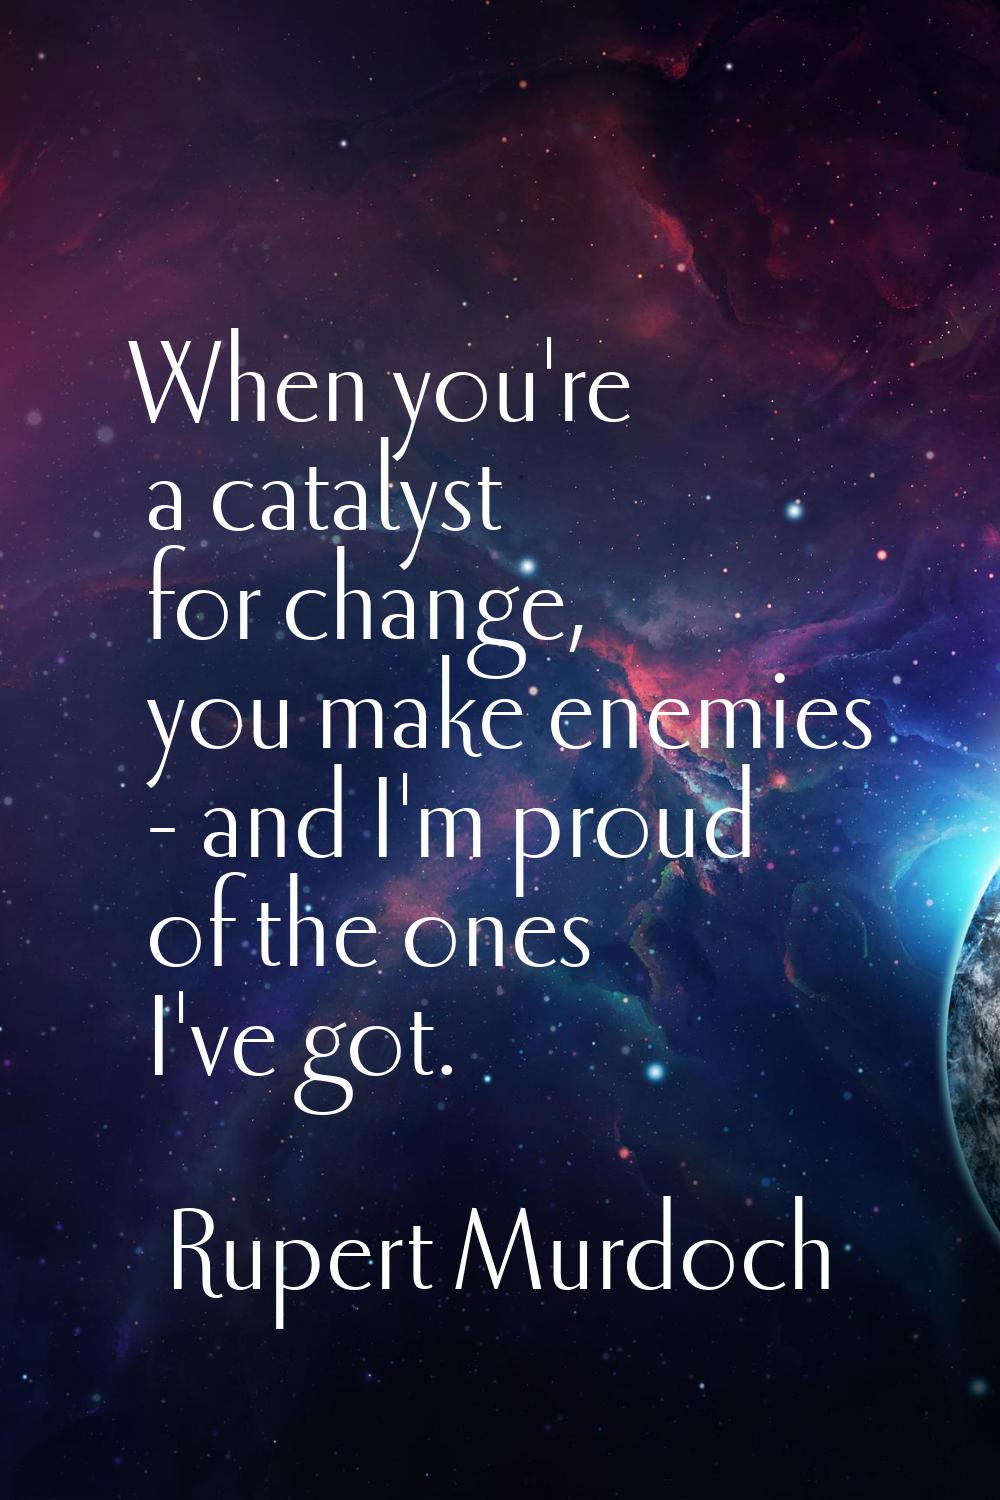 When you're a catalyst for change, you make enemies - and I'm proud of the ones I've got.